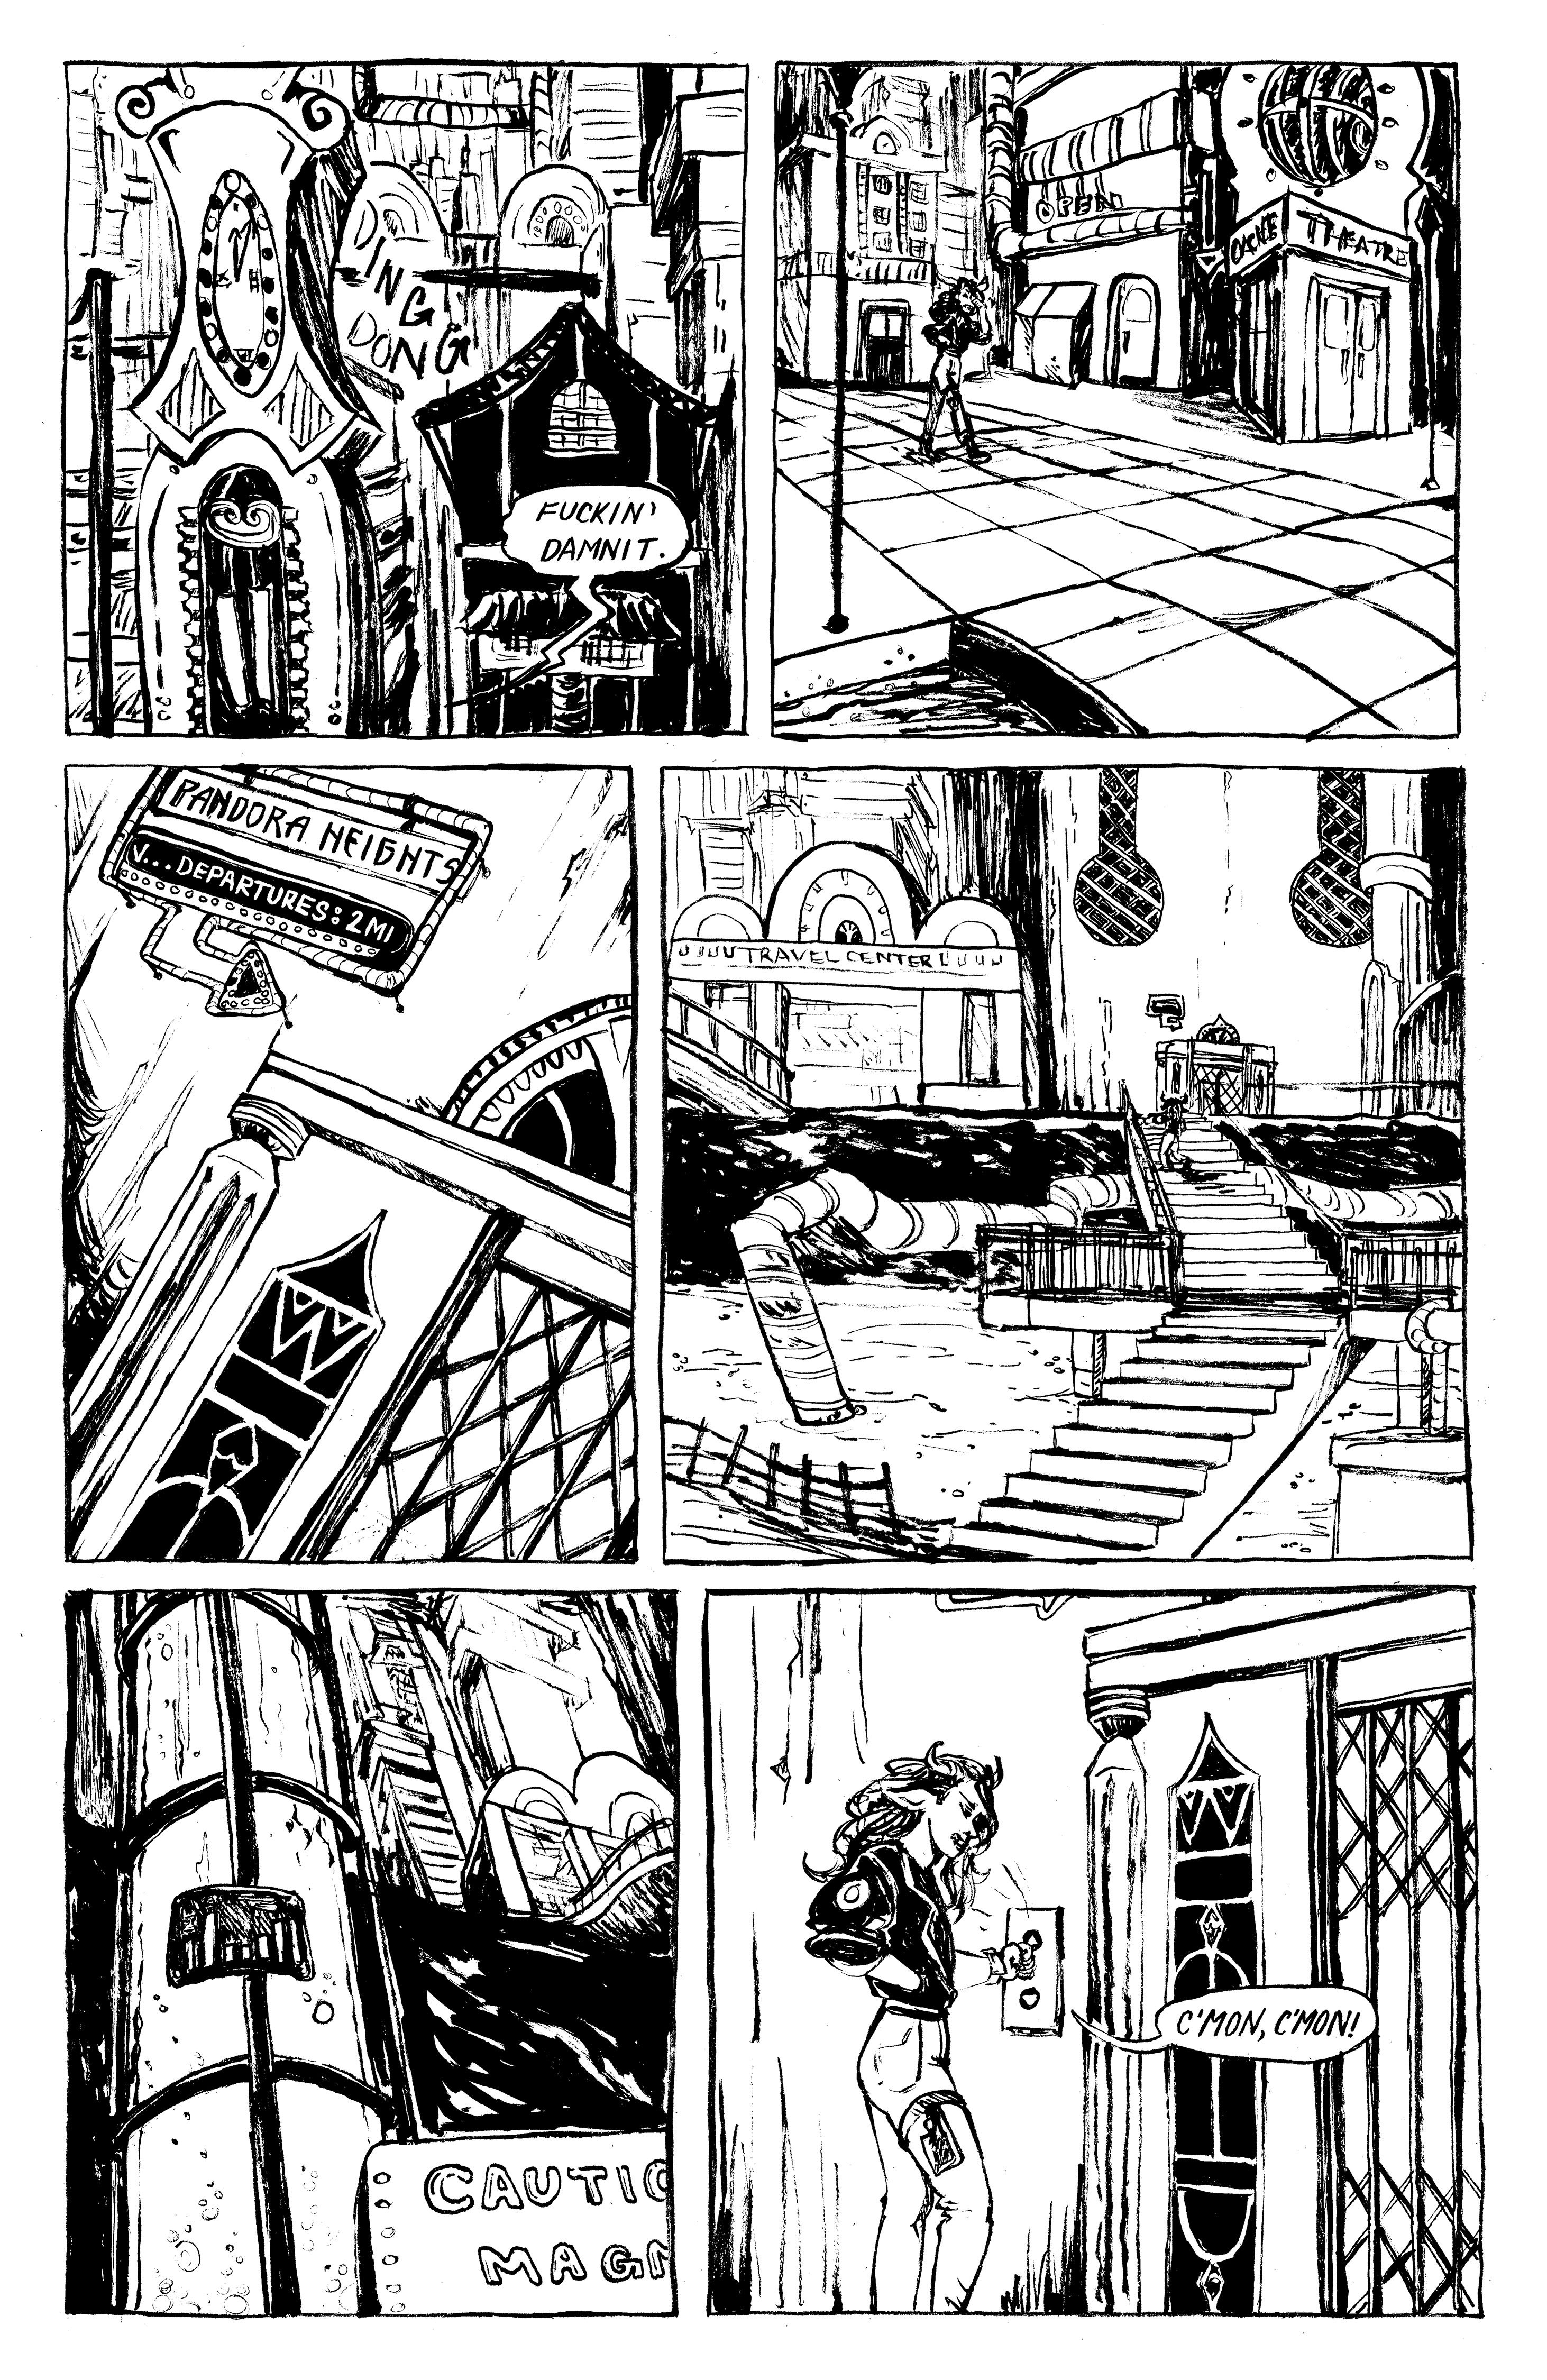 1 of 4 comic pages by Remy Burke